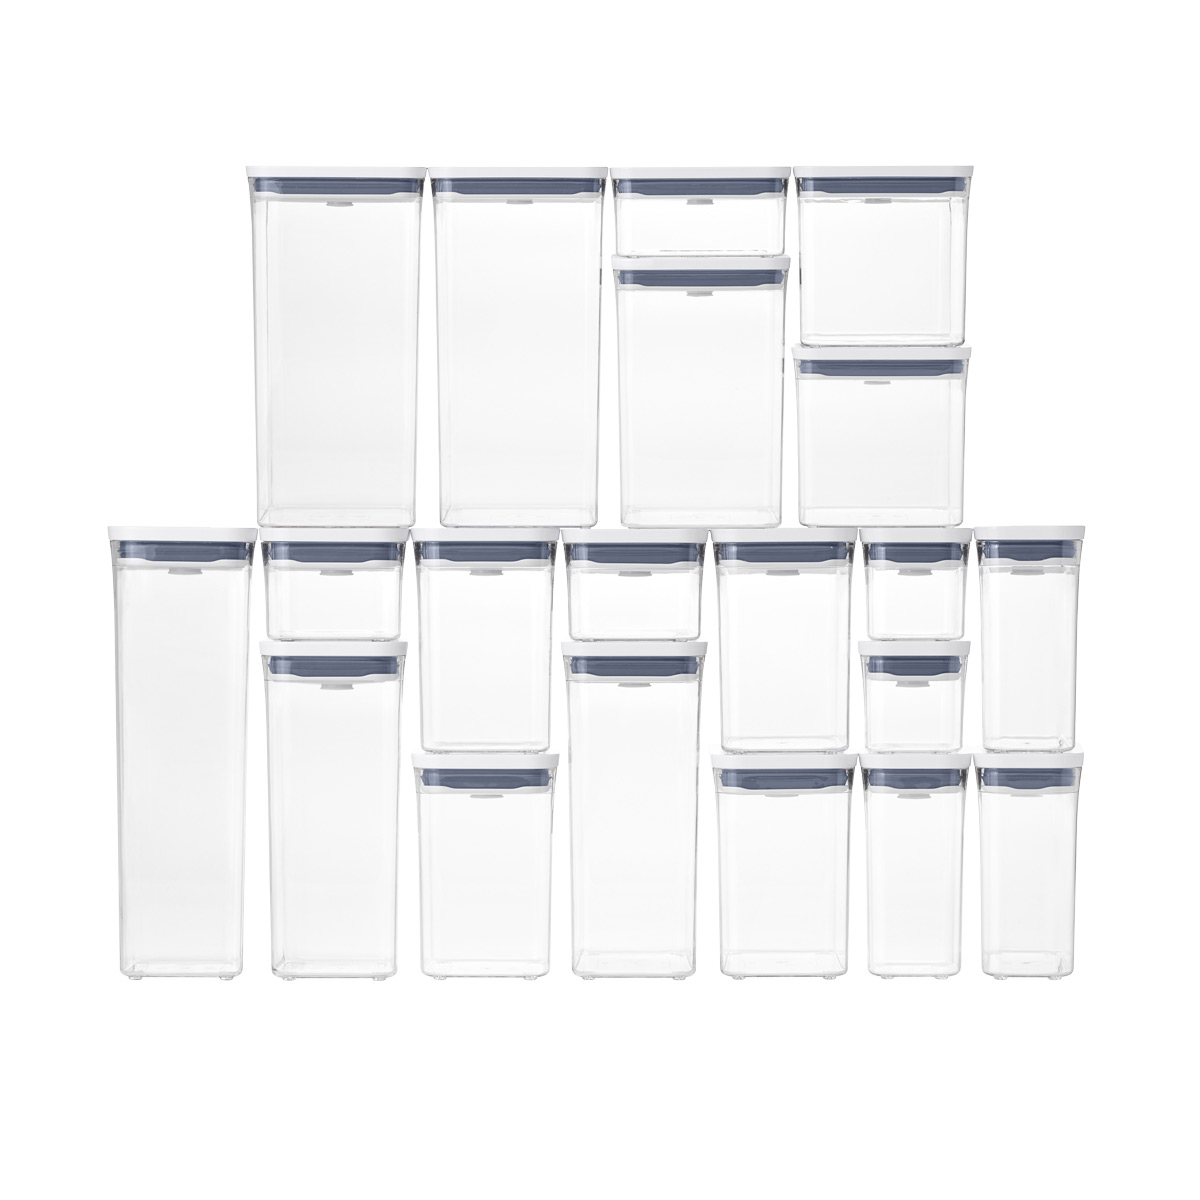 https://www.containerstore.com/catalogimages/368919/10075022-OXO-20-Piece-POP-Container-.jpg